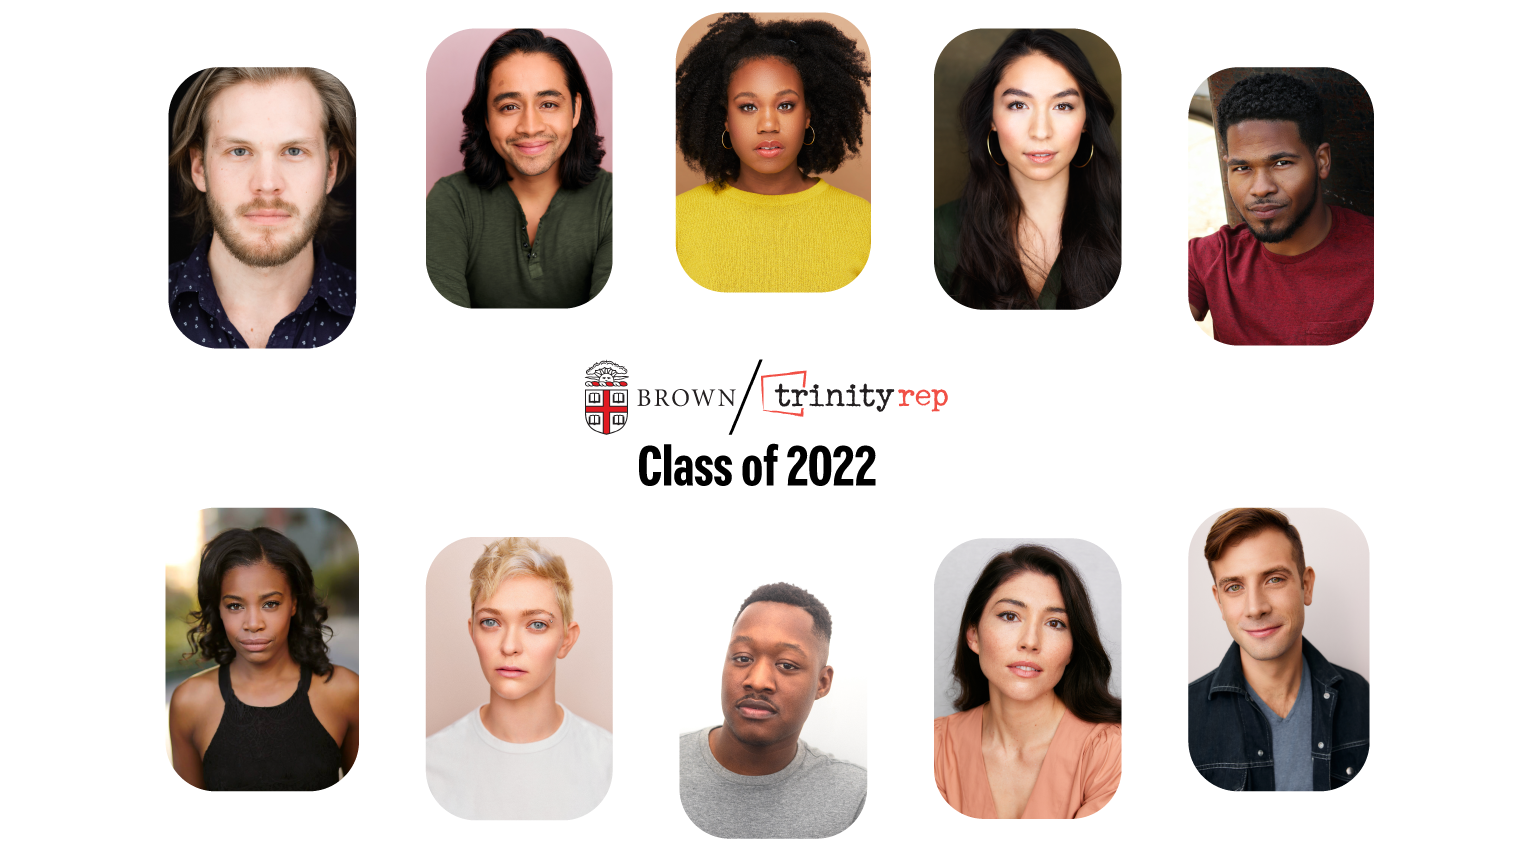 Image of actors of the Class of 2022